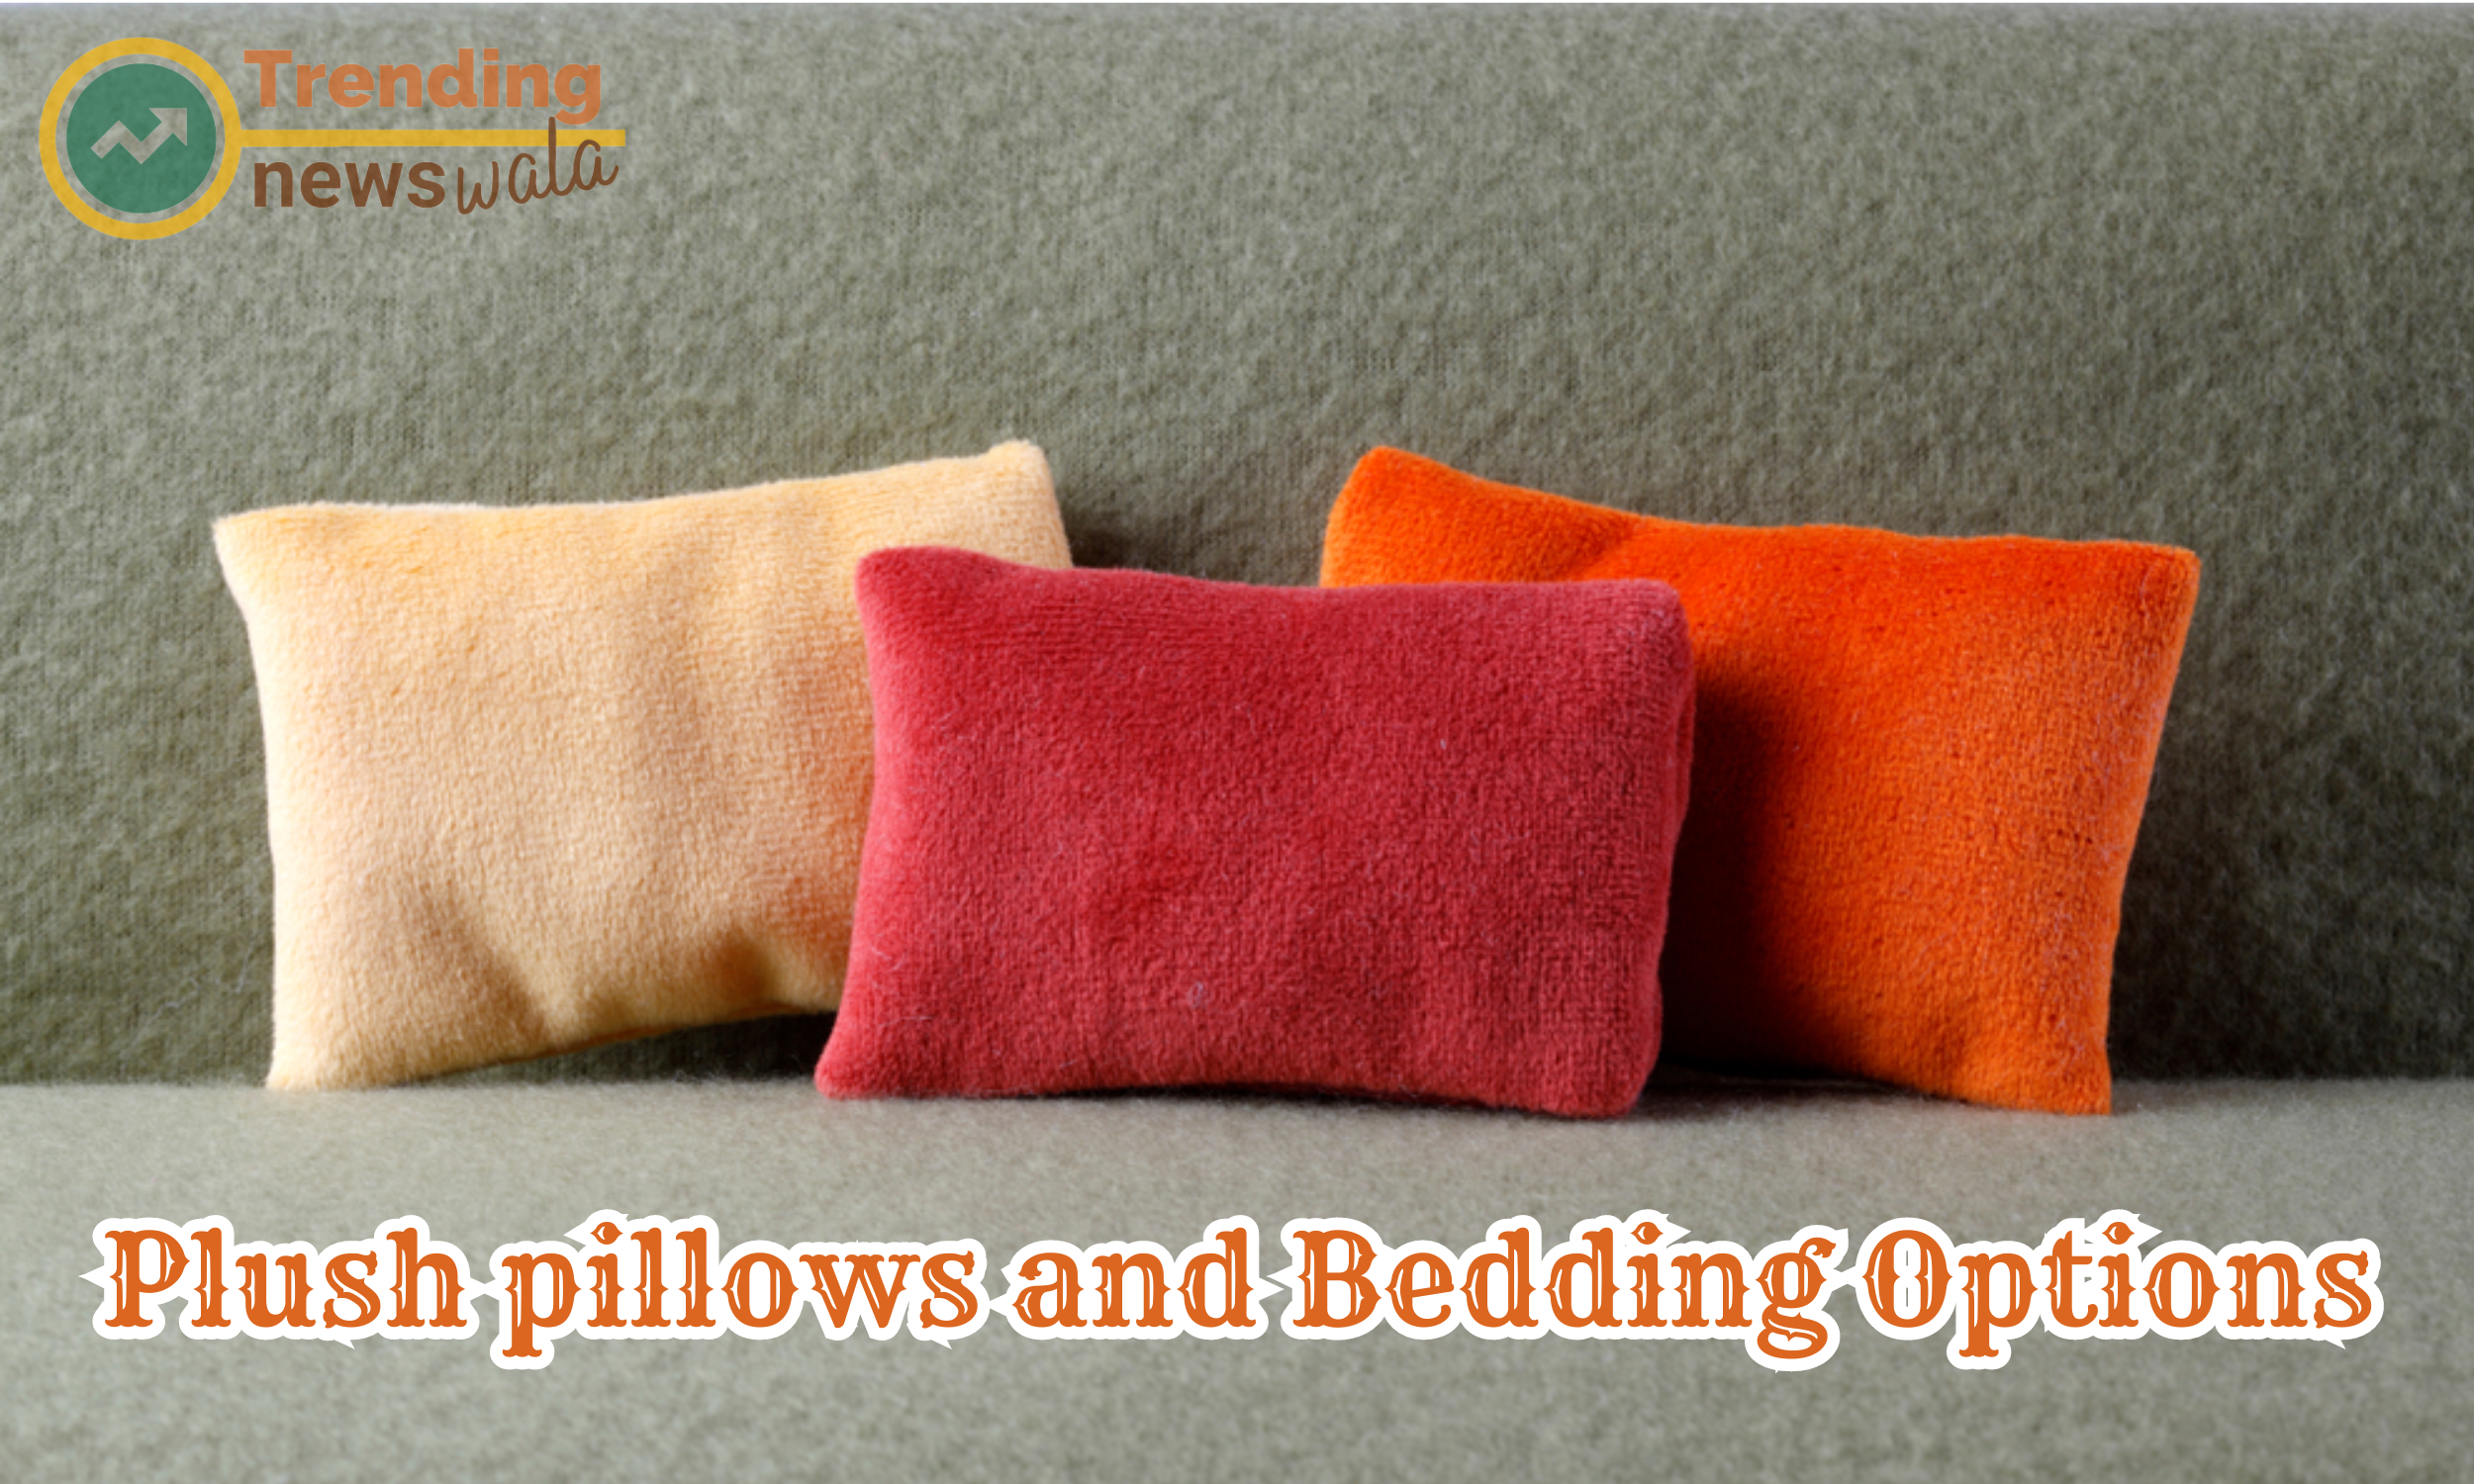 Plush pillows and bedding options are crucial elements in creating a comfortable and inviting bedroom